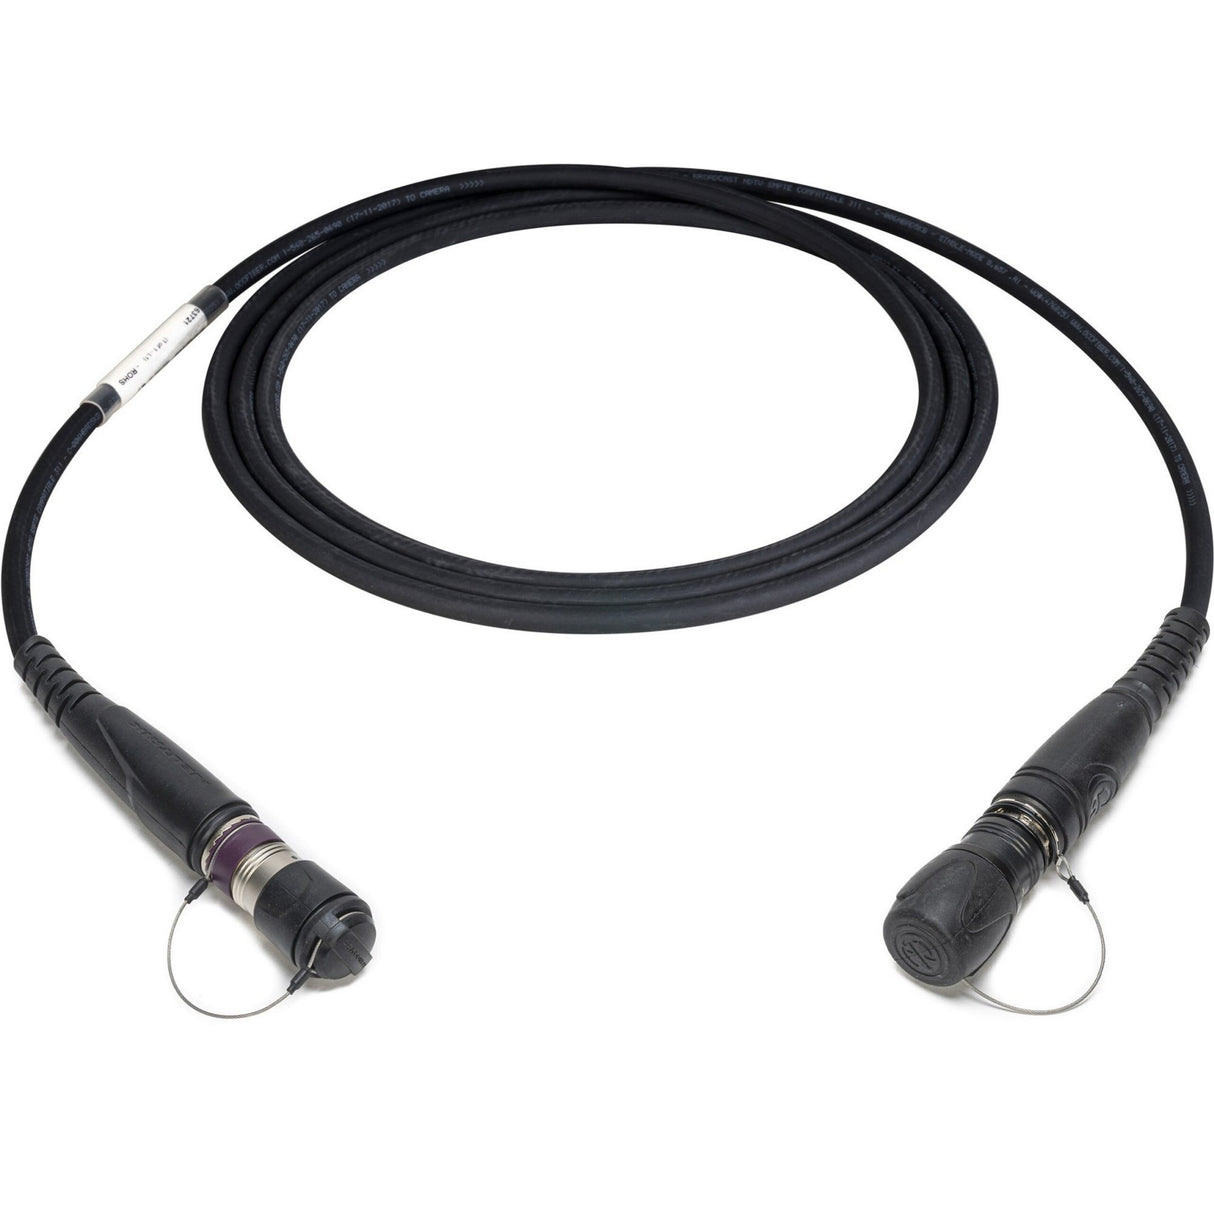 Camplex HF-OC2NOM-0750 opticalCON DUO to DRAGONFLY Male SMPTE Fiber Optic Cable, 750-Foot